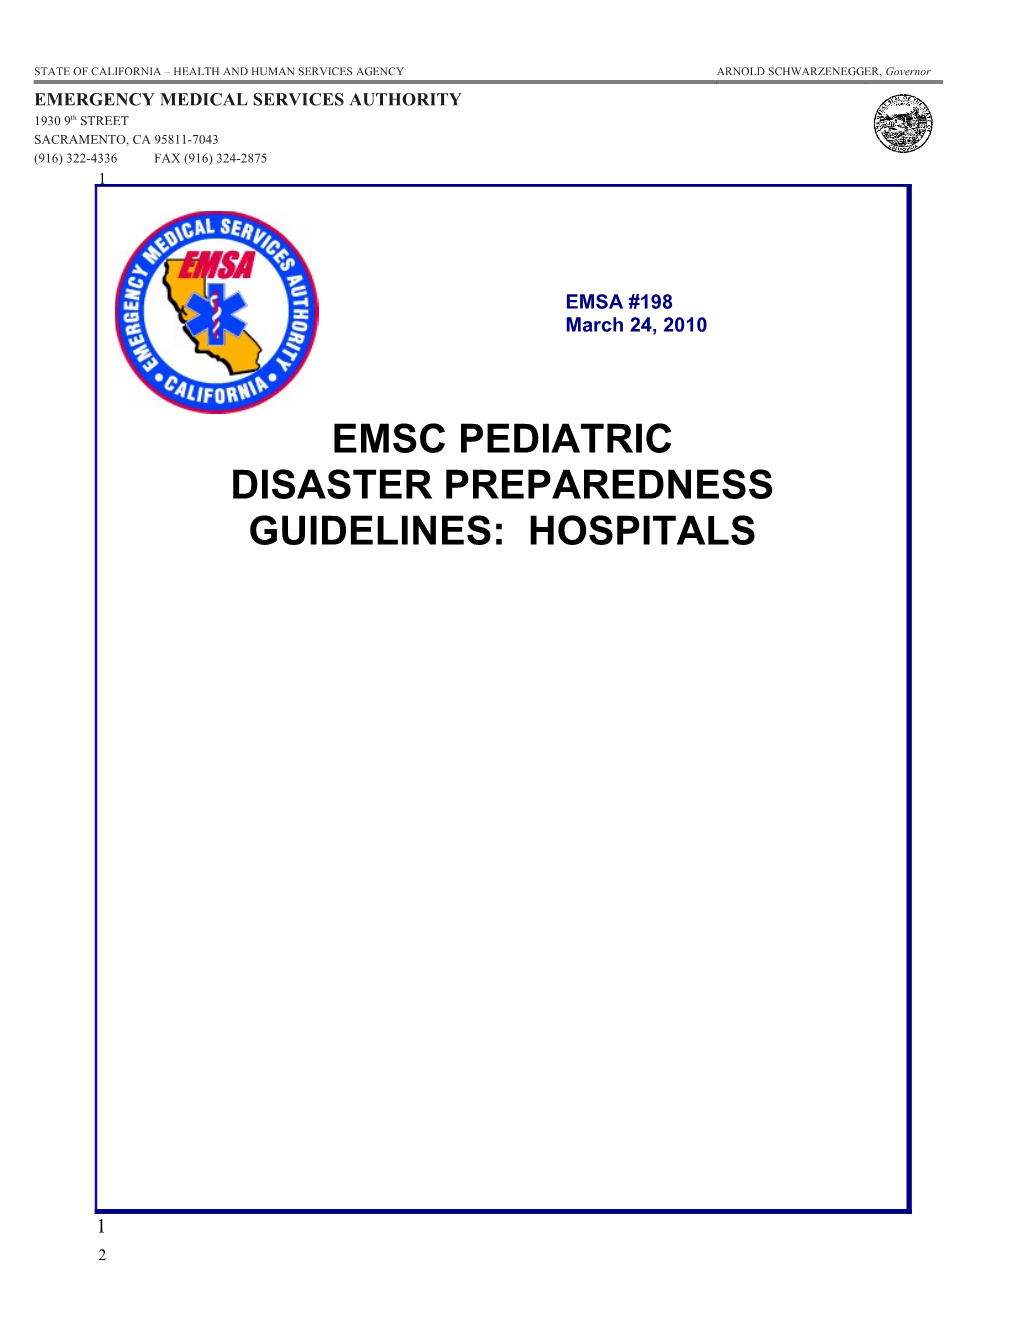 Prehospital Care of Children in Disasters